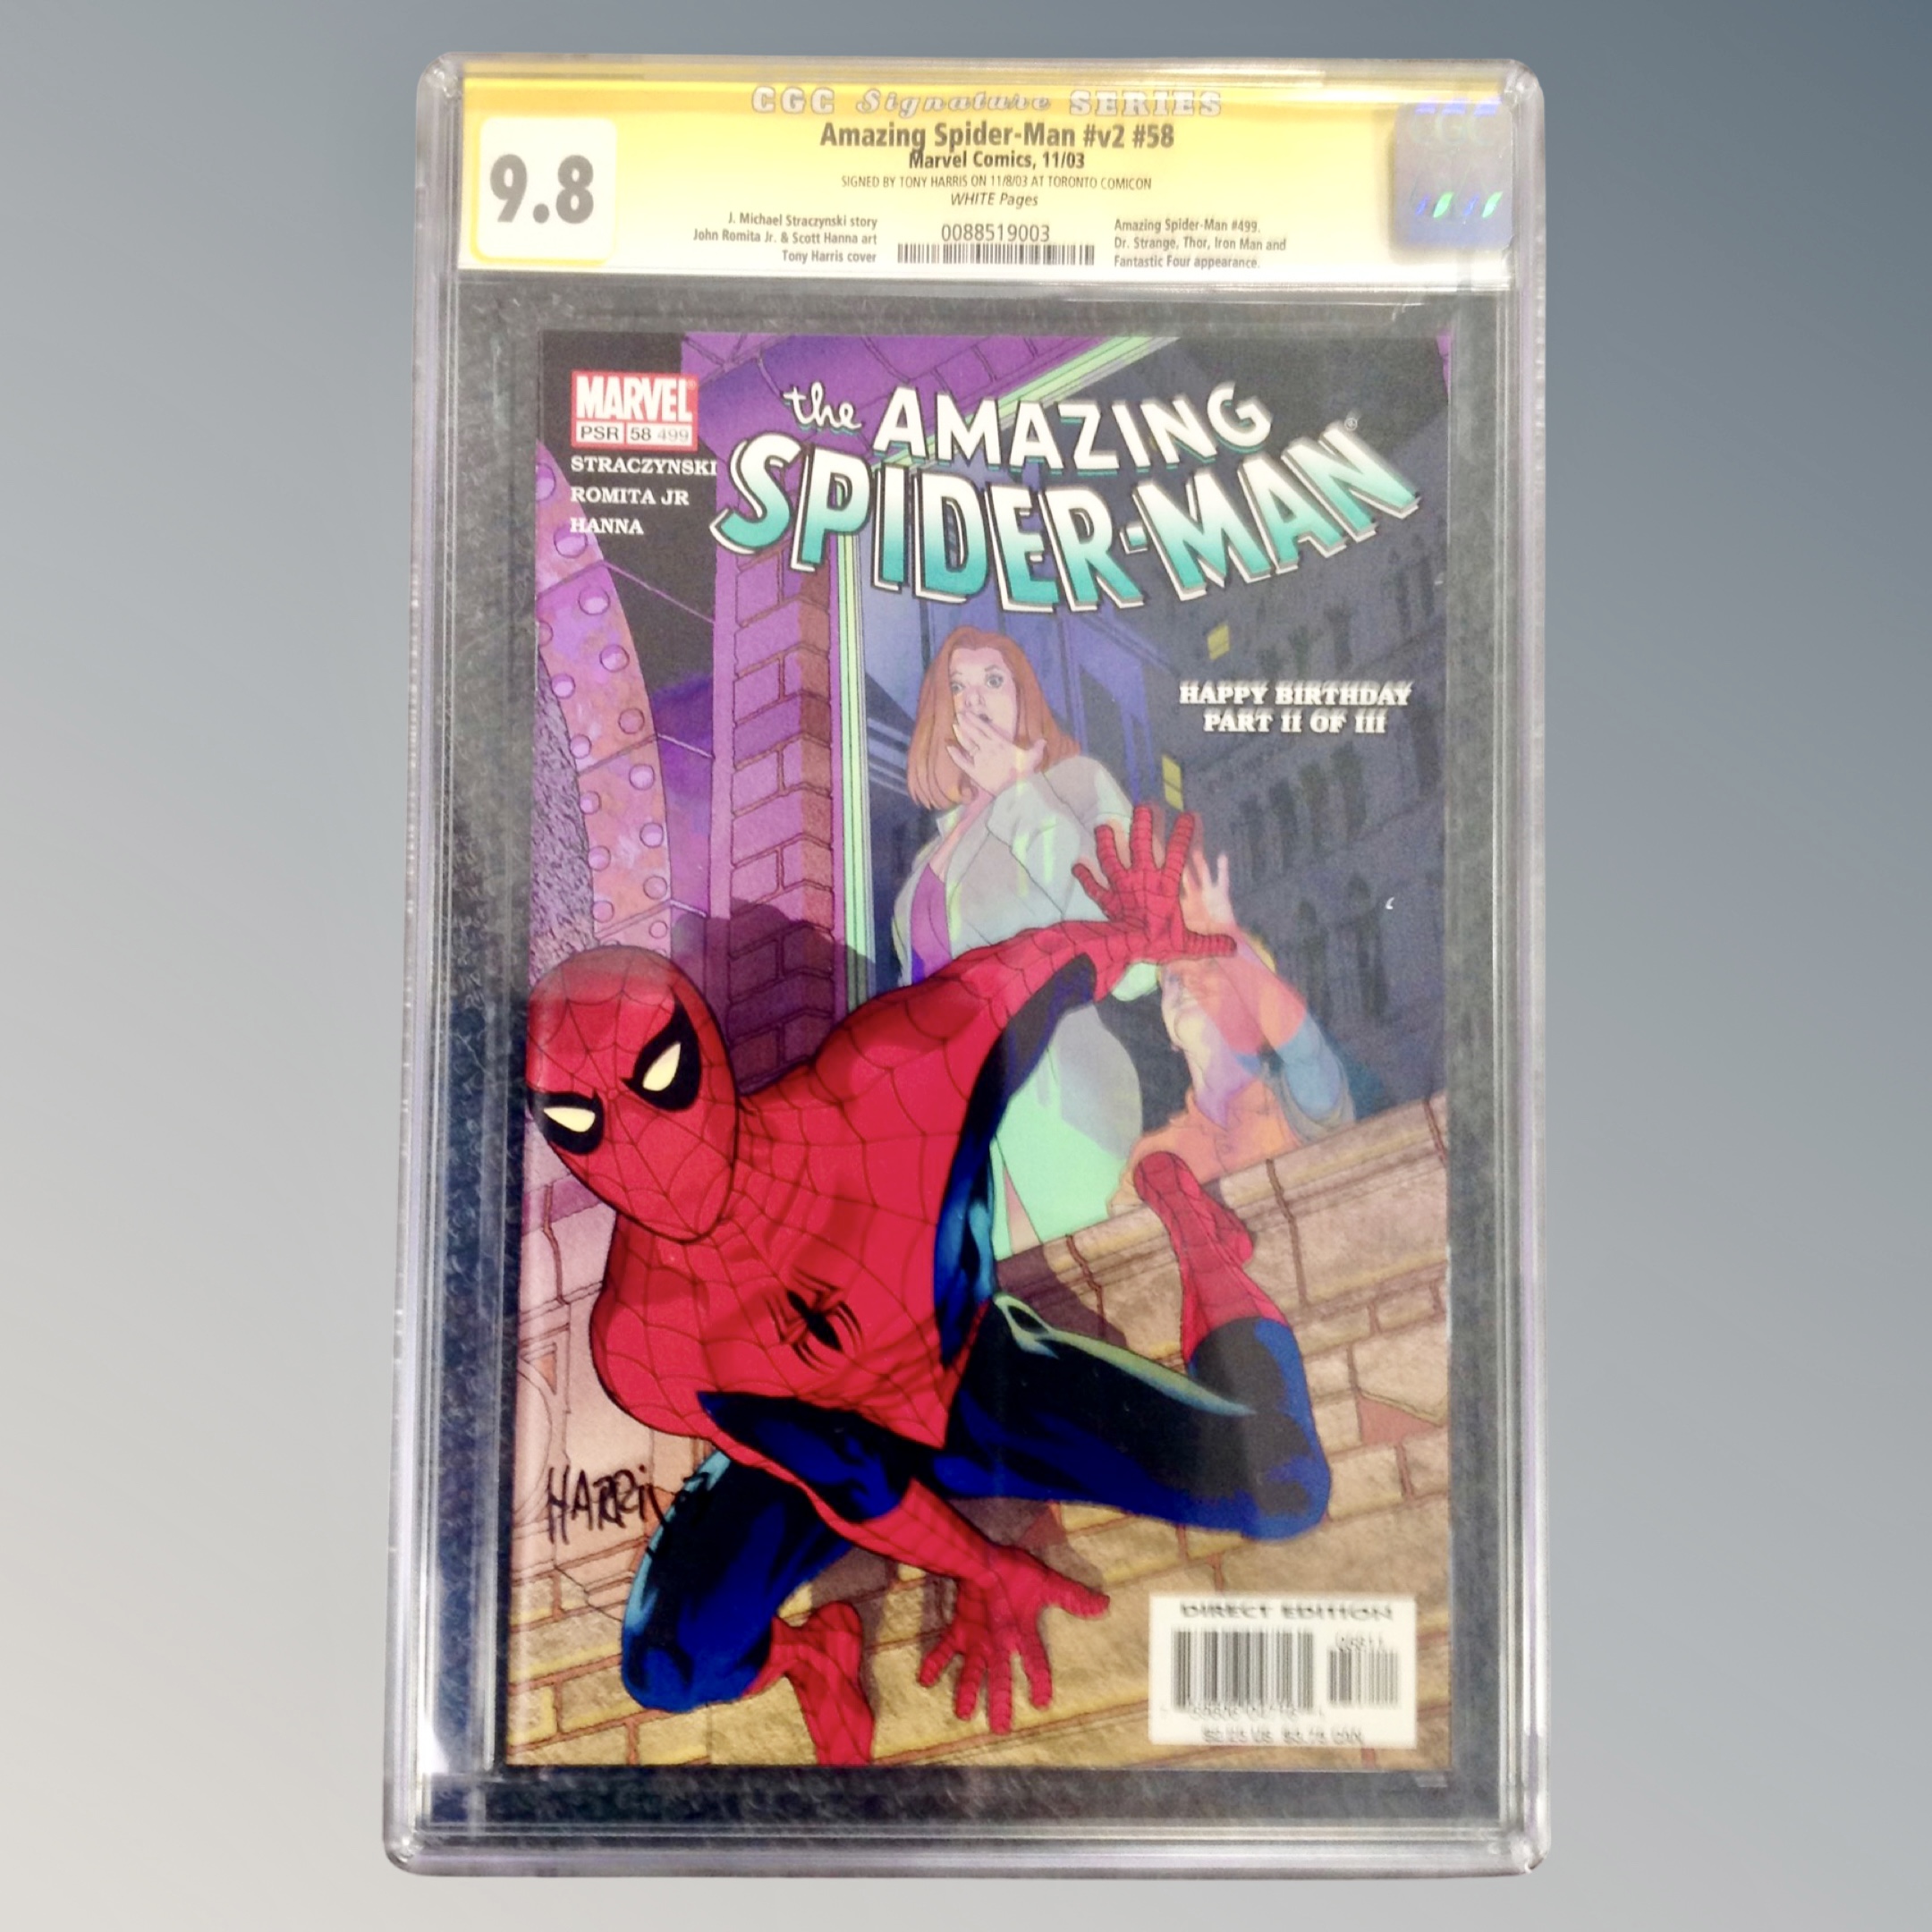 Marvel Comics : The Amazing Spider-Man issue 58, Happy Birthday Part II of III, Direct Edition,